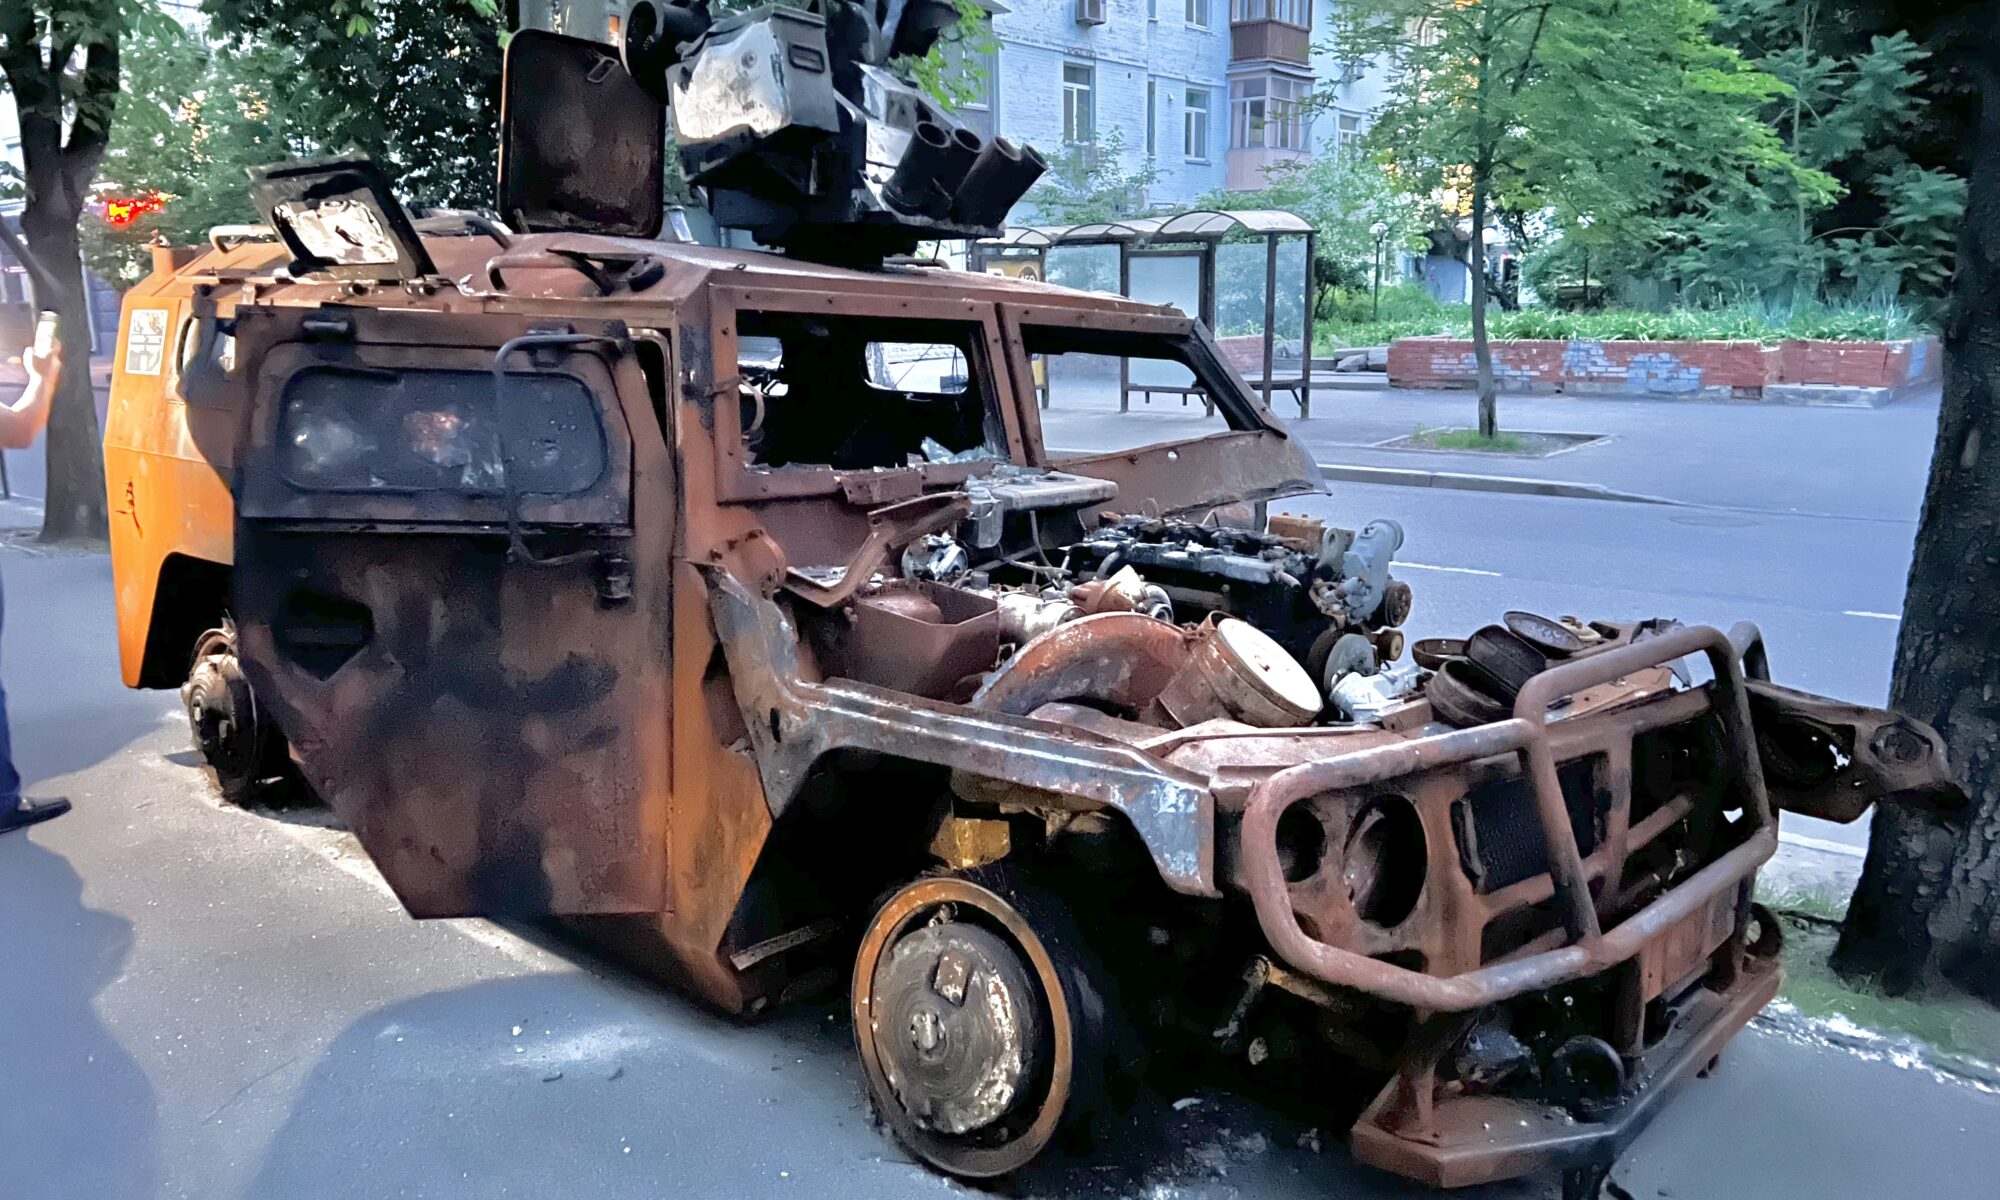 A burned out Russian Army vehicle on display in Kyiv